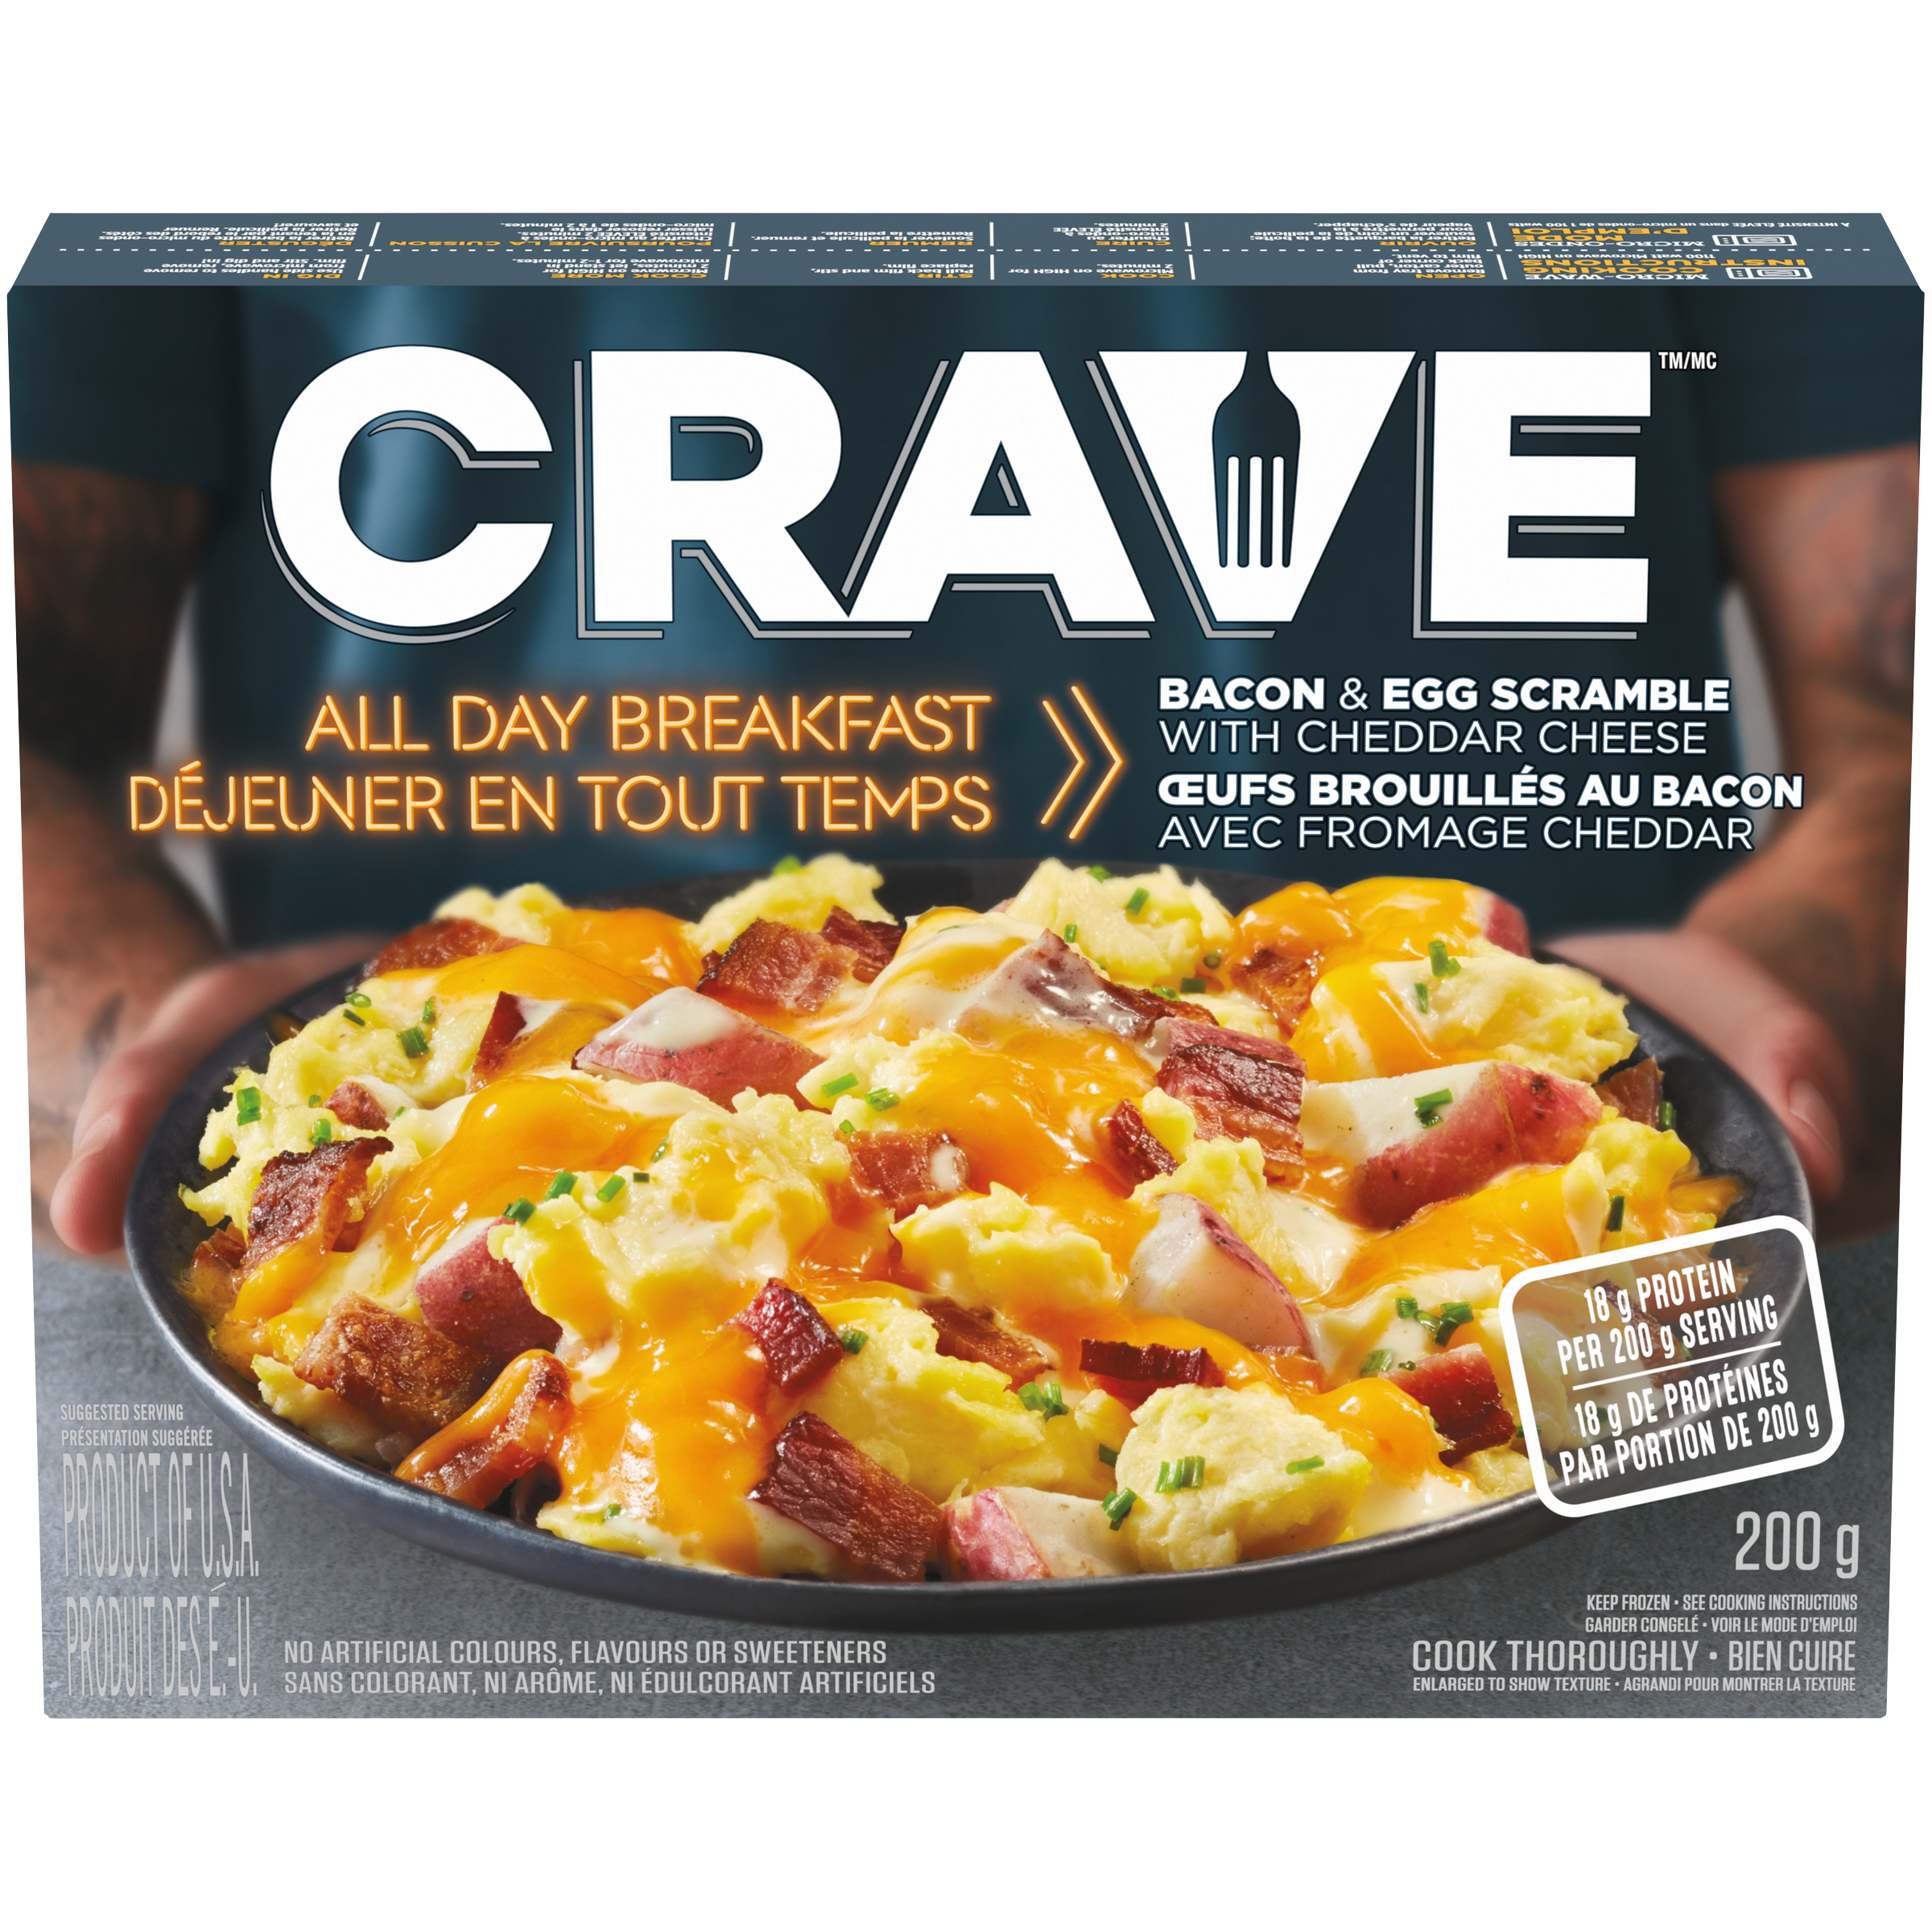 All Day Breakfast Bacon & Egg Scramble With Cheddar Cheese